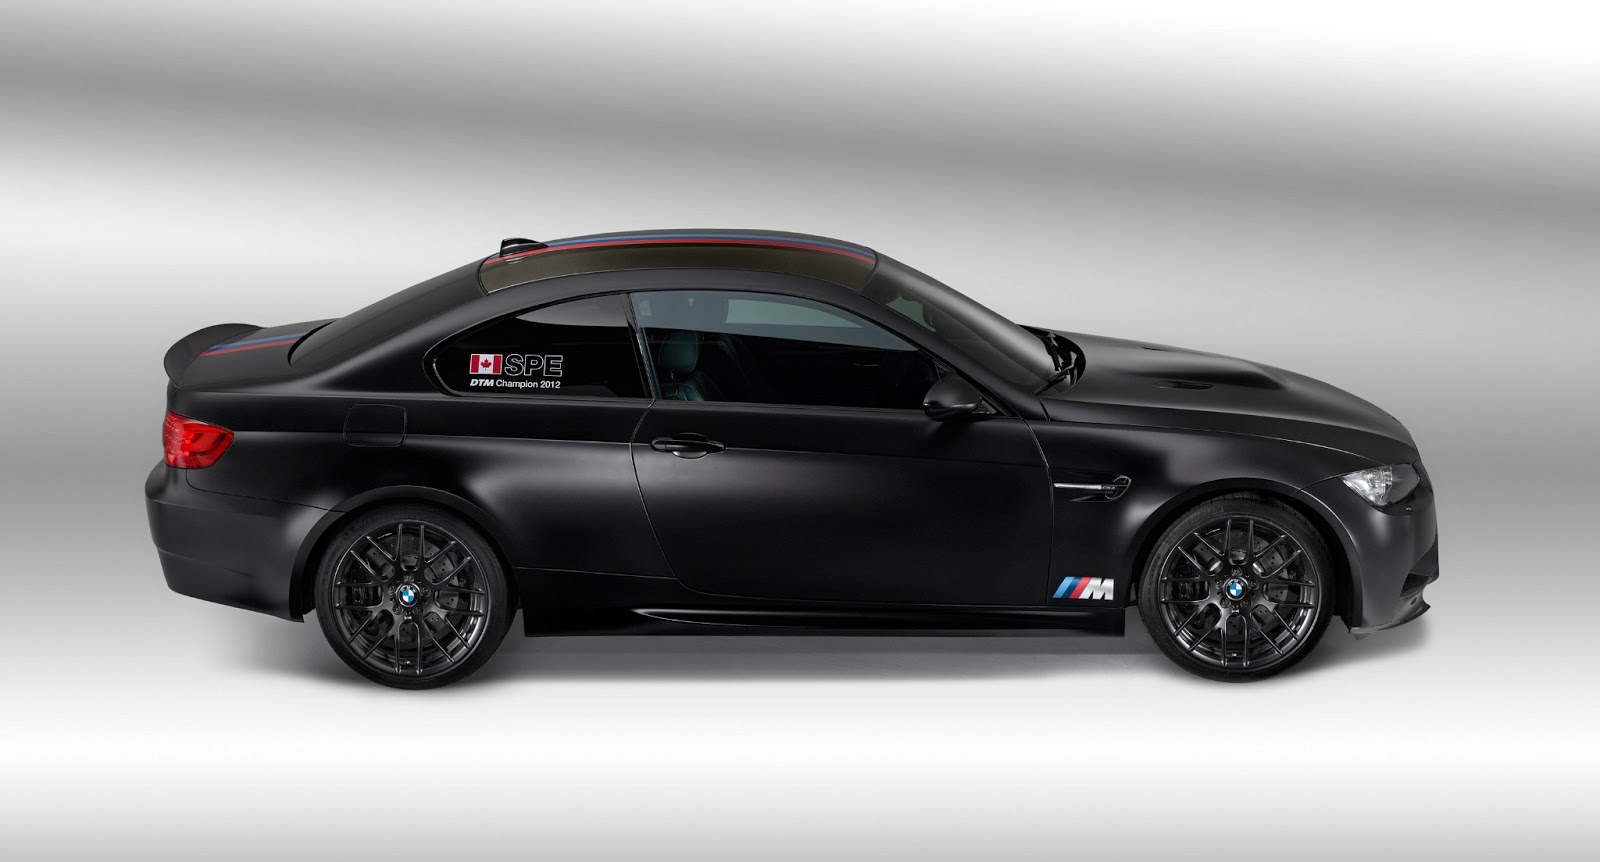 99 WALLPAPERS: Video : The New BMW M3 DTM Concept Car [Official ...